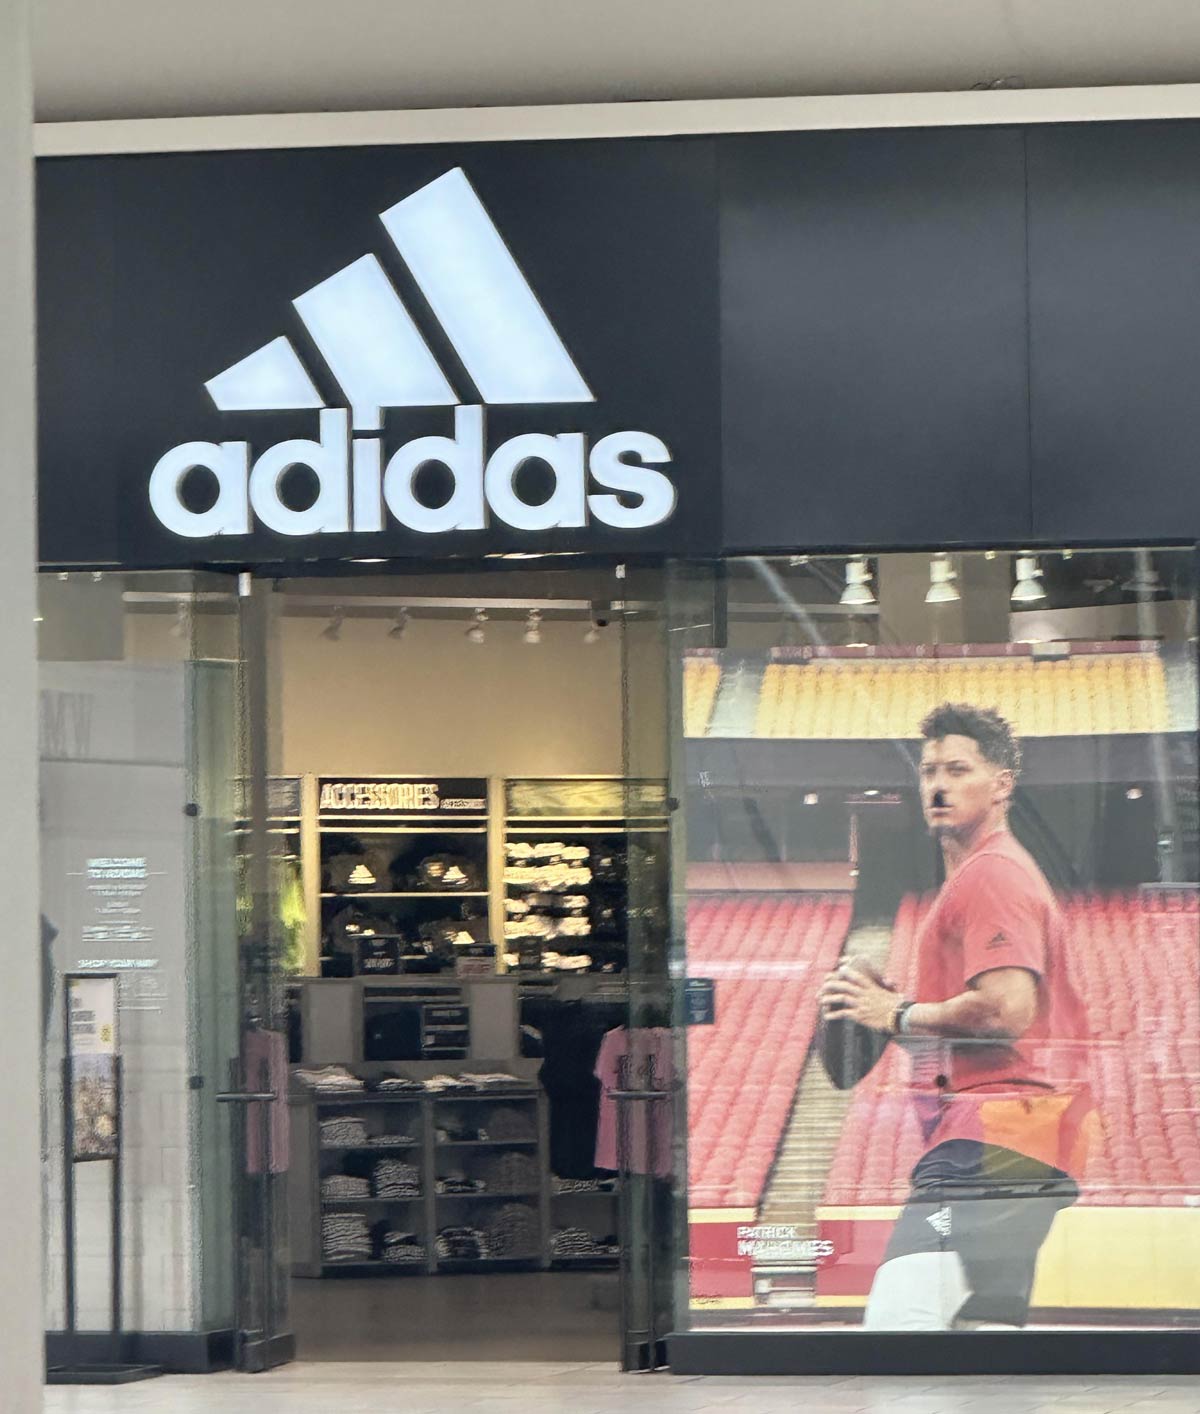 Well this is awkward Adidas